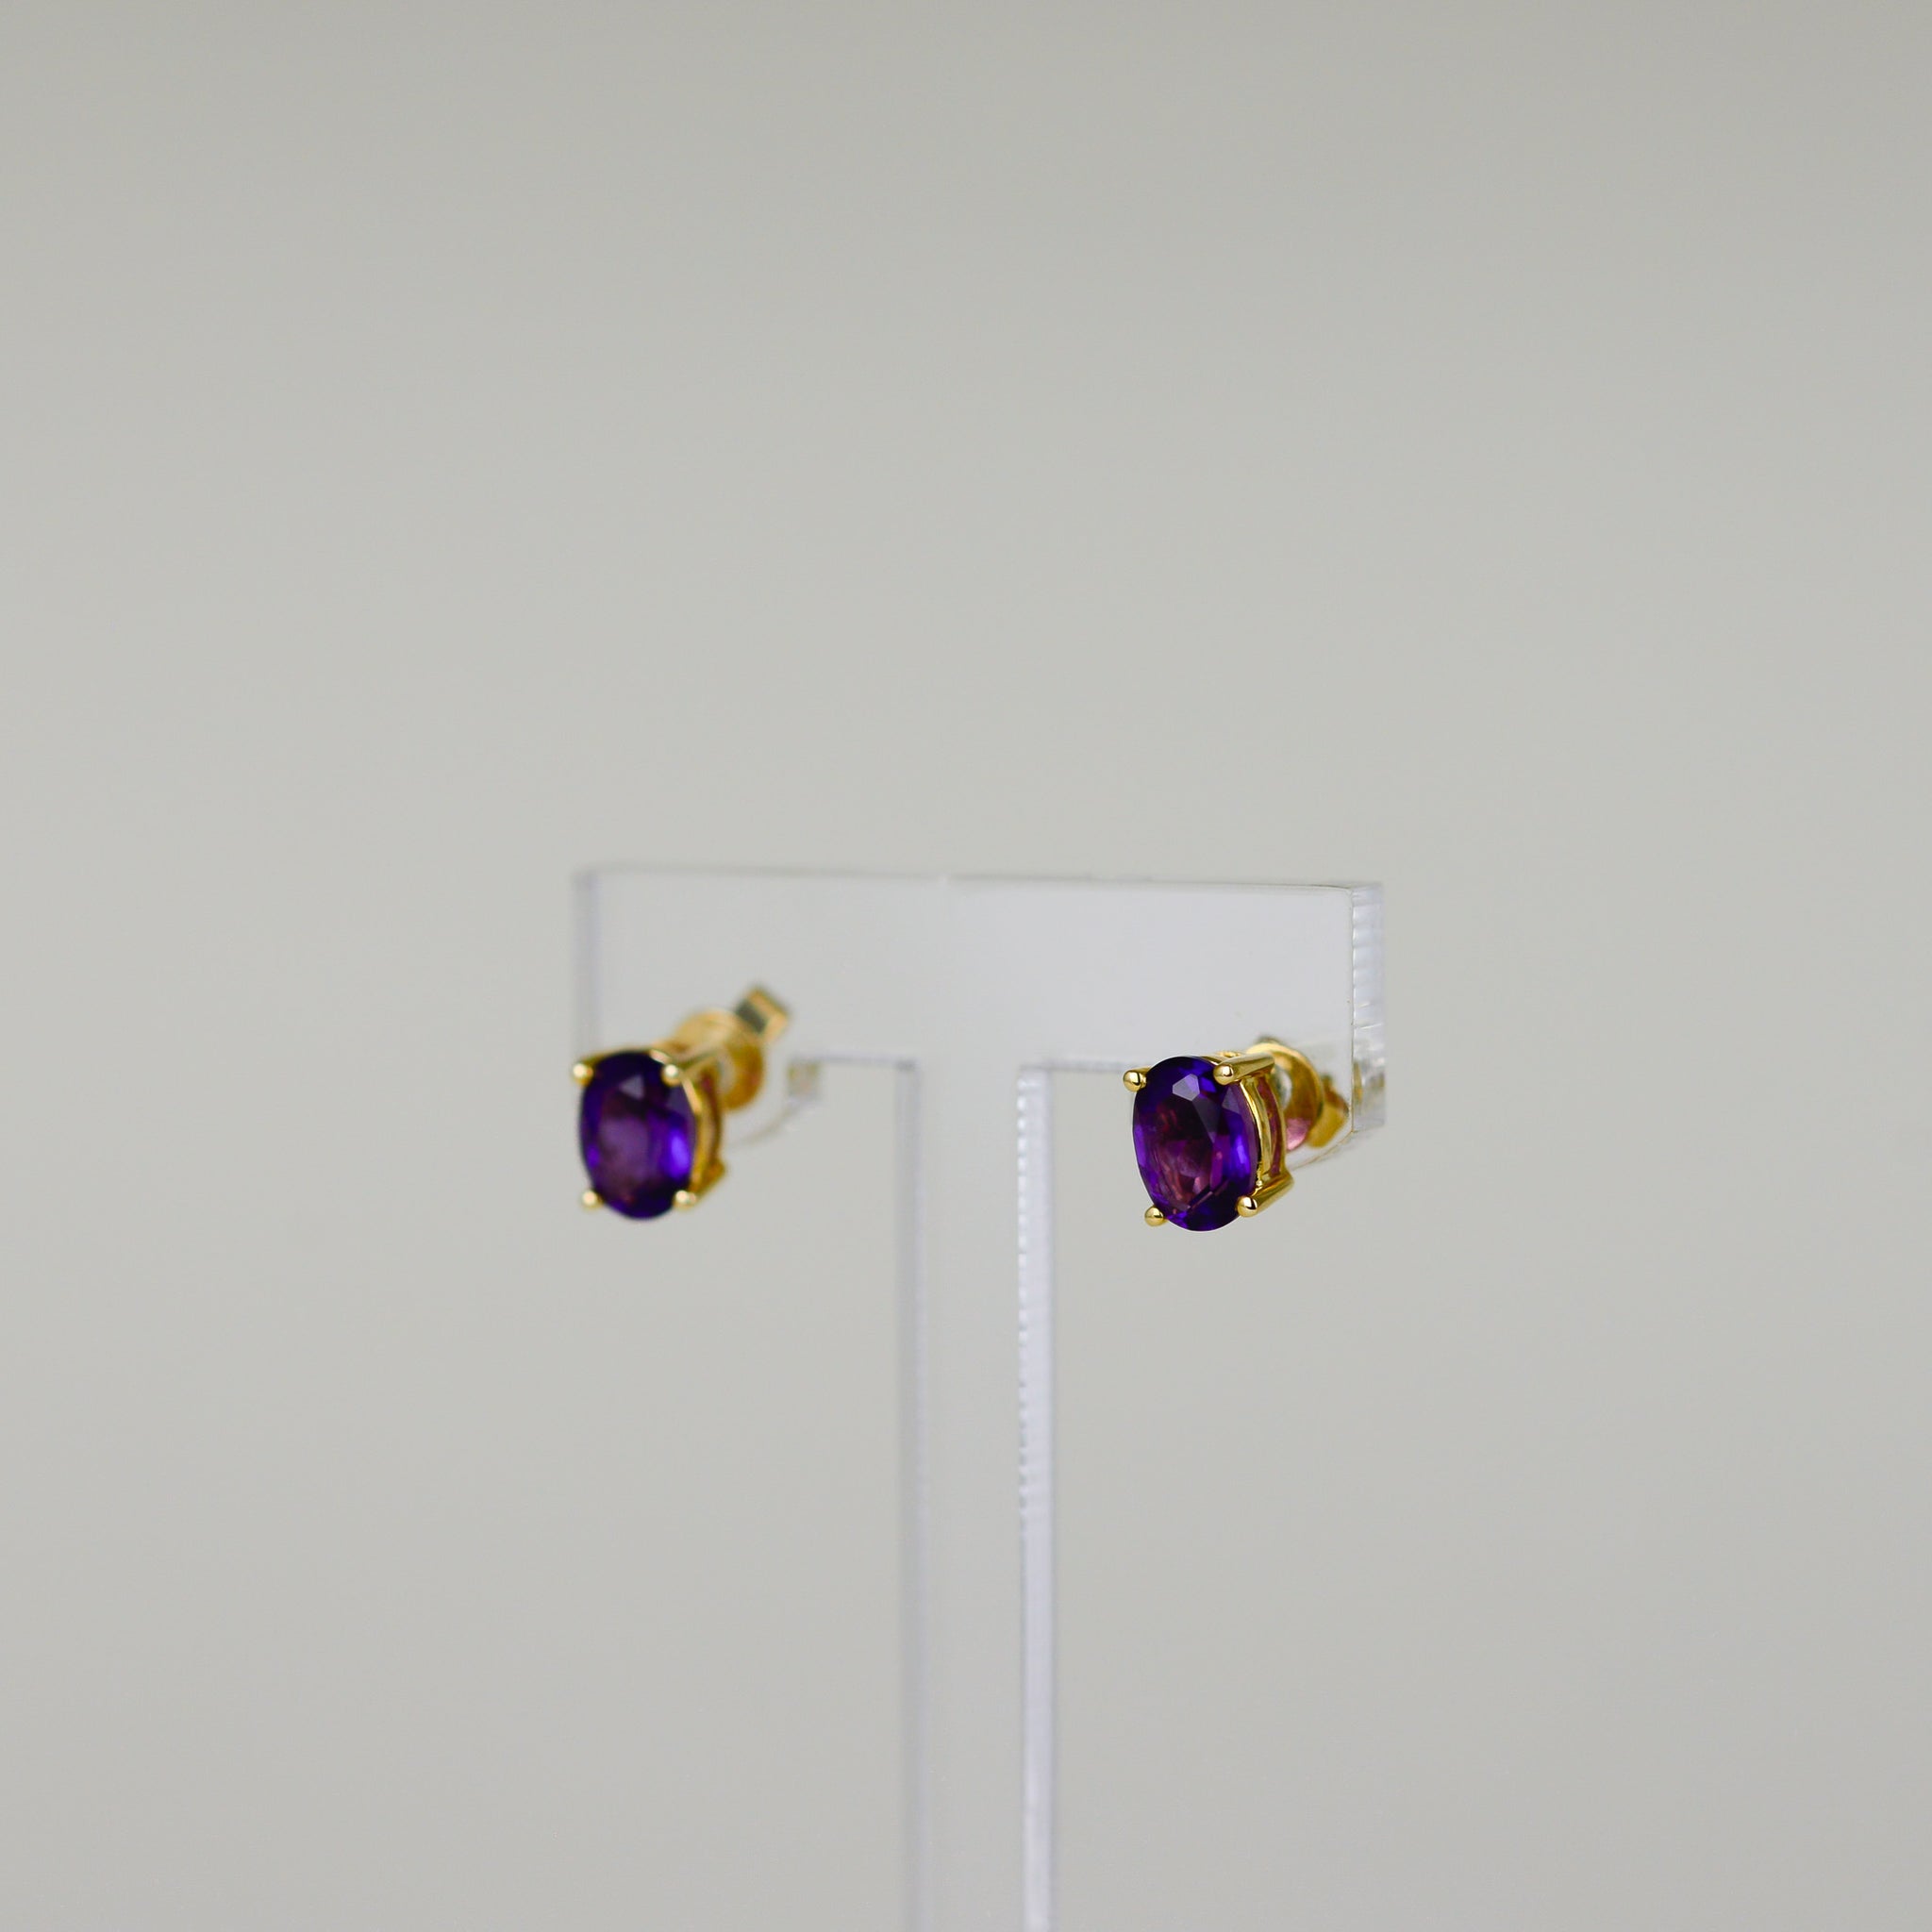 9ct Yellow Gold 1.59ct Oval Amethyst Stud Earrings